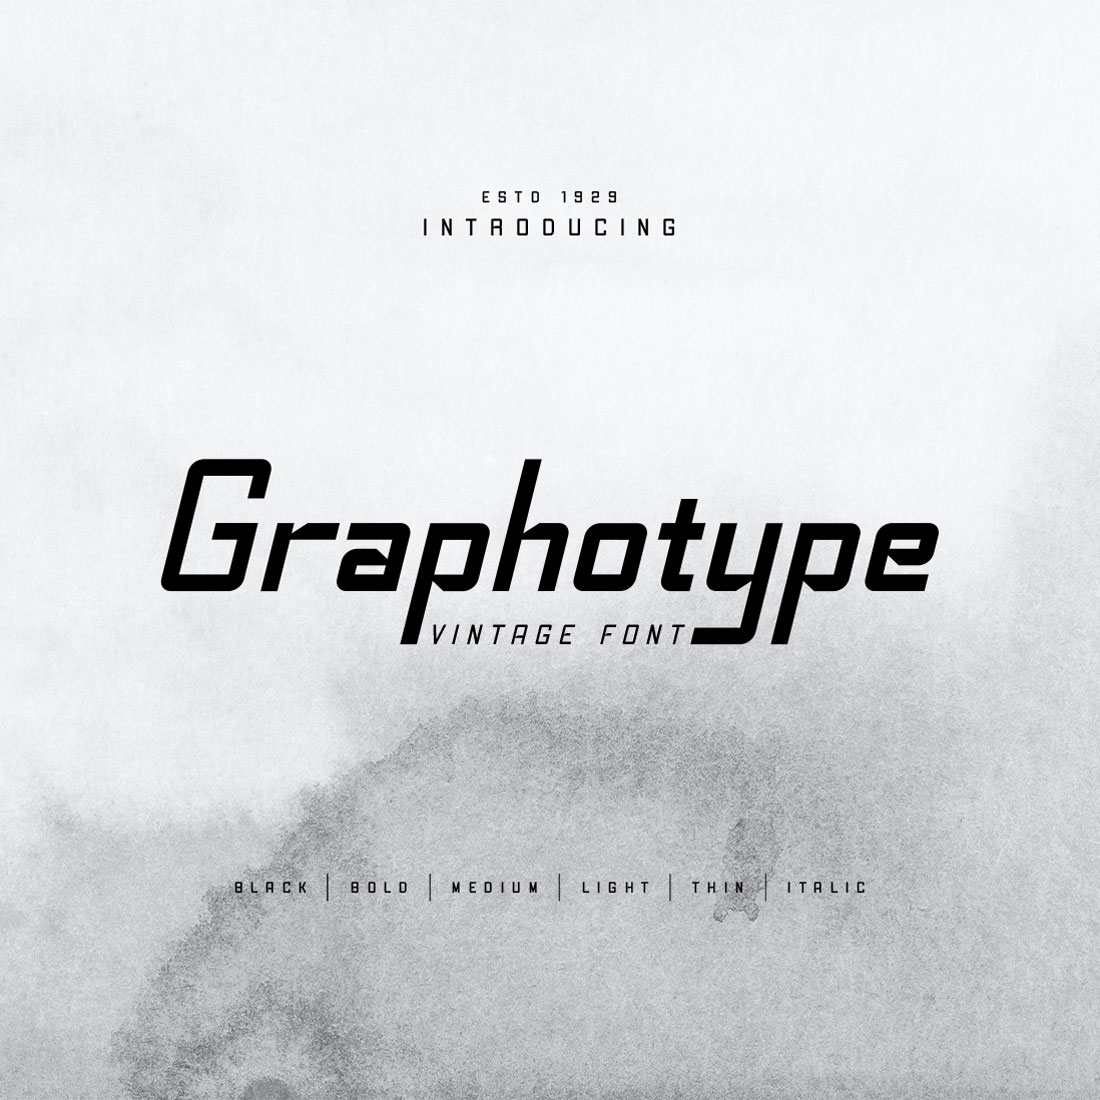 Graphotype Vintage Font - main image preview.